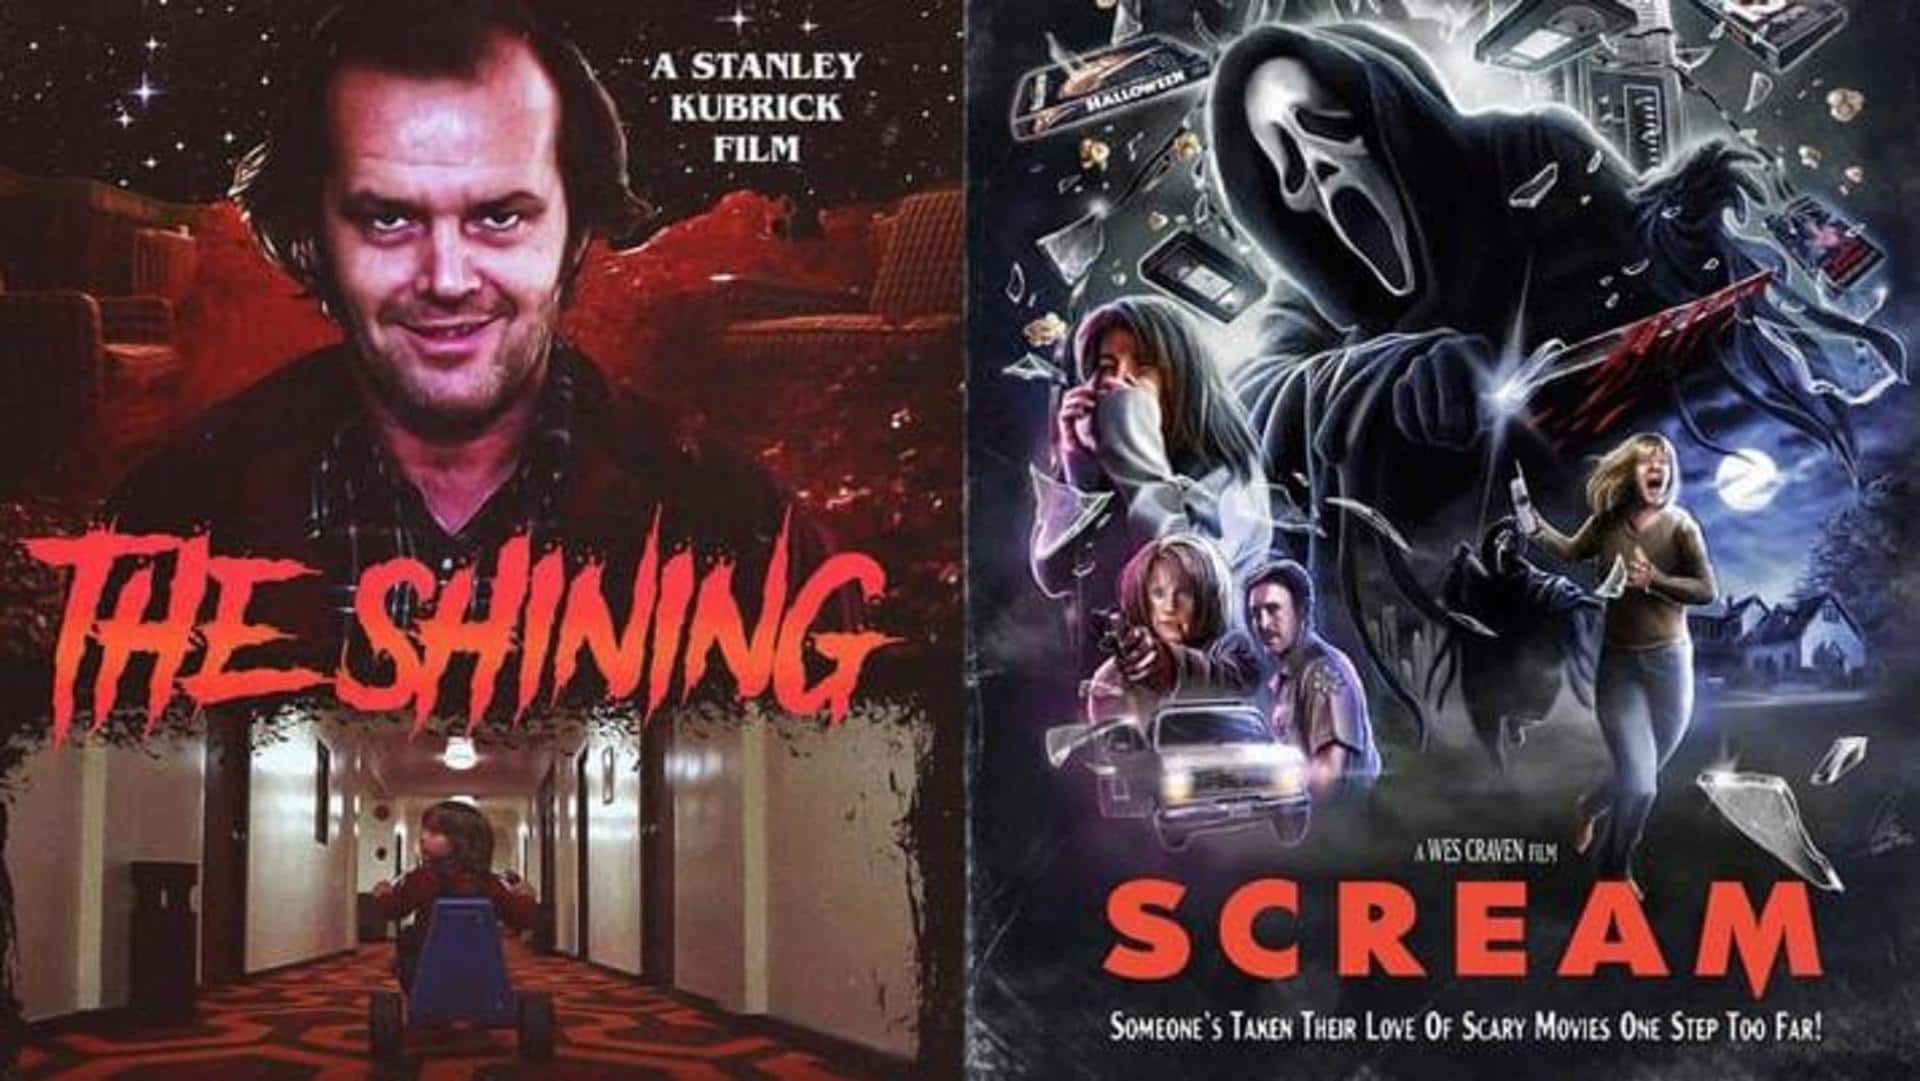 Film Twitter discusses best horror films—which one is your pick?